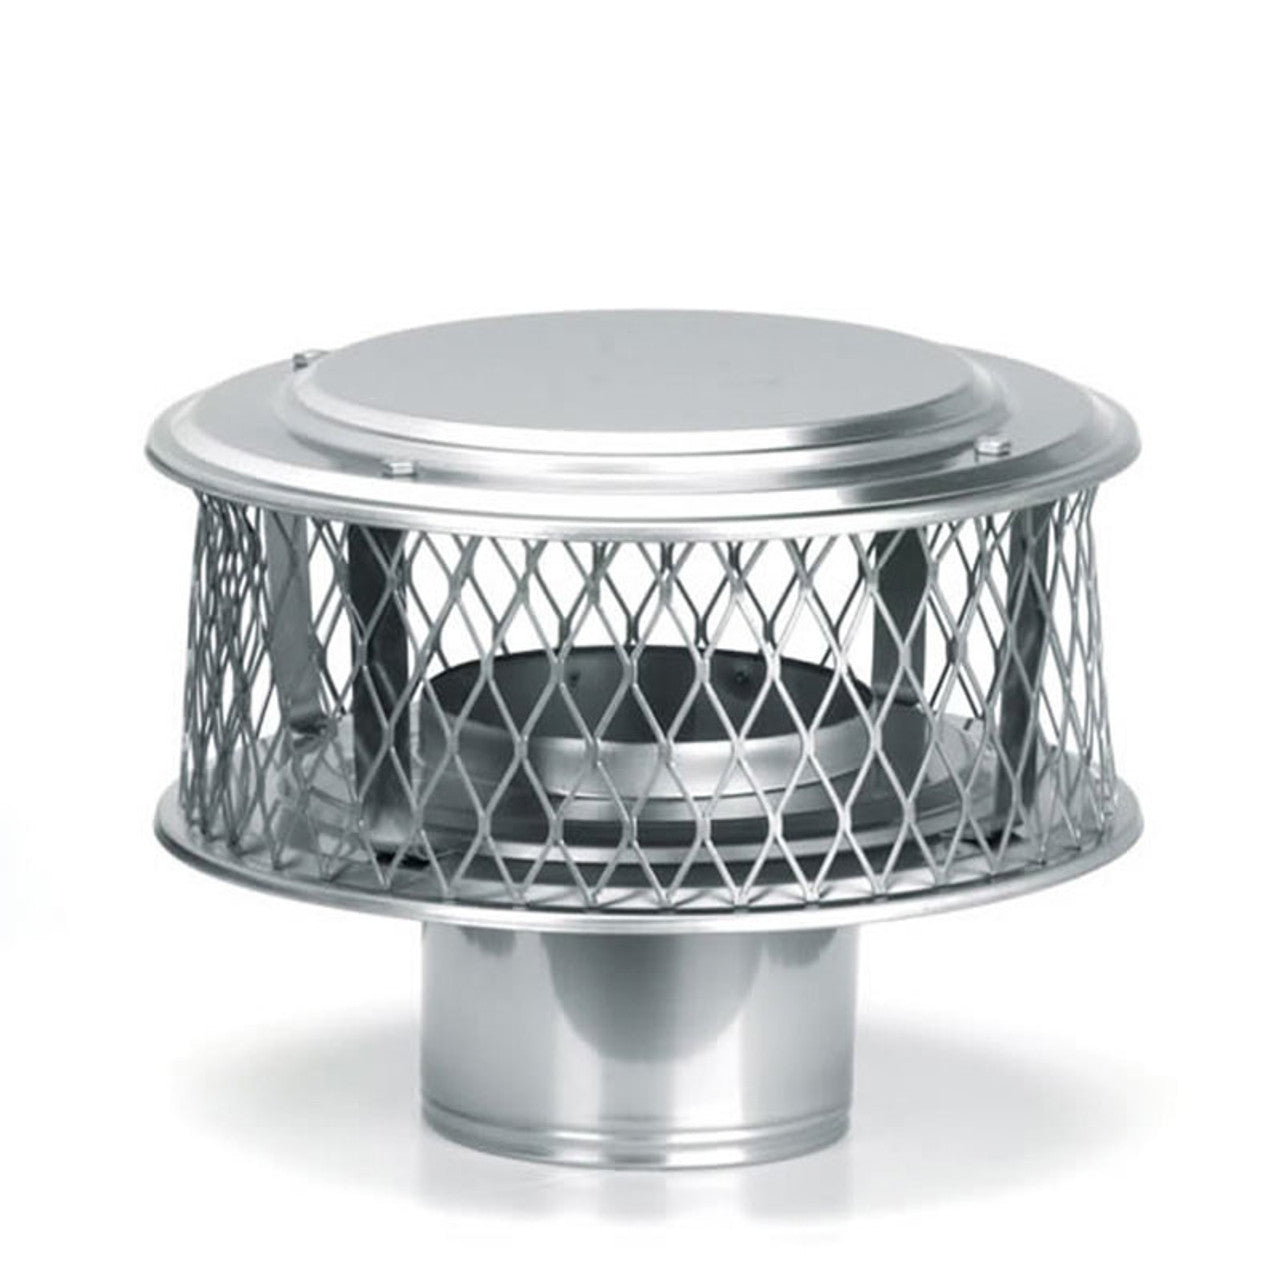 10" HomeSaver 304-Alloy Stainless Steel Guardian Cap with 5/8" Mesh - Chimney Cricket